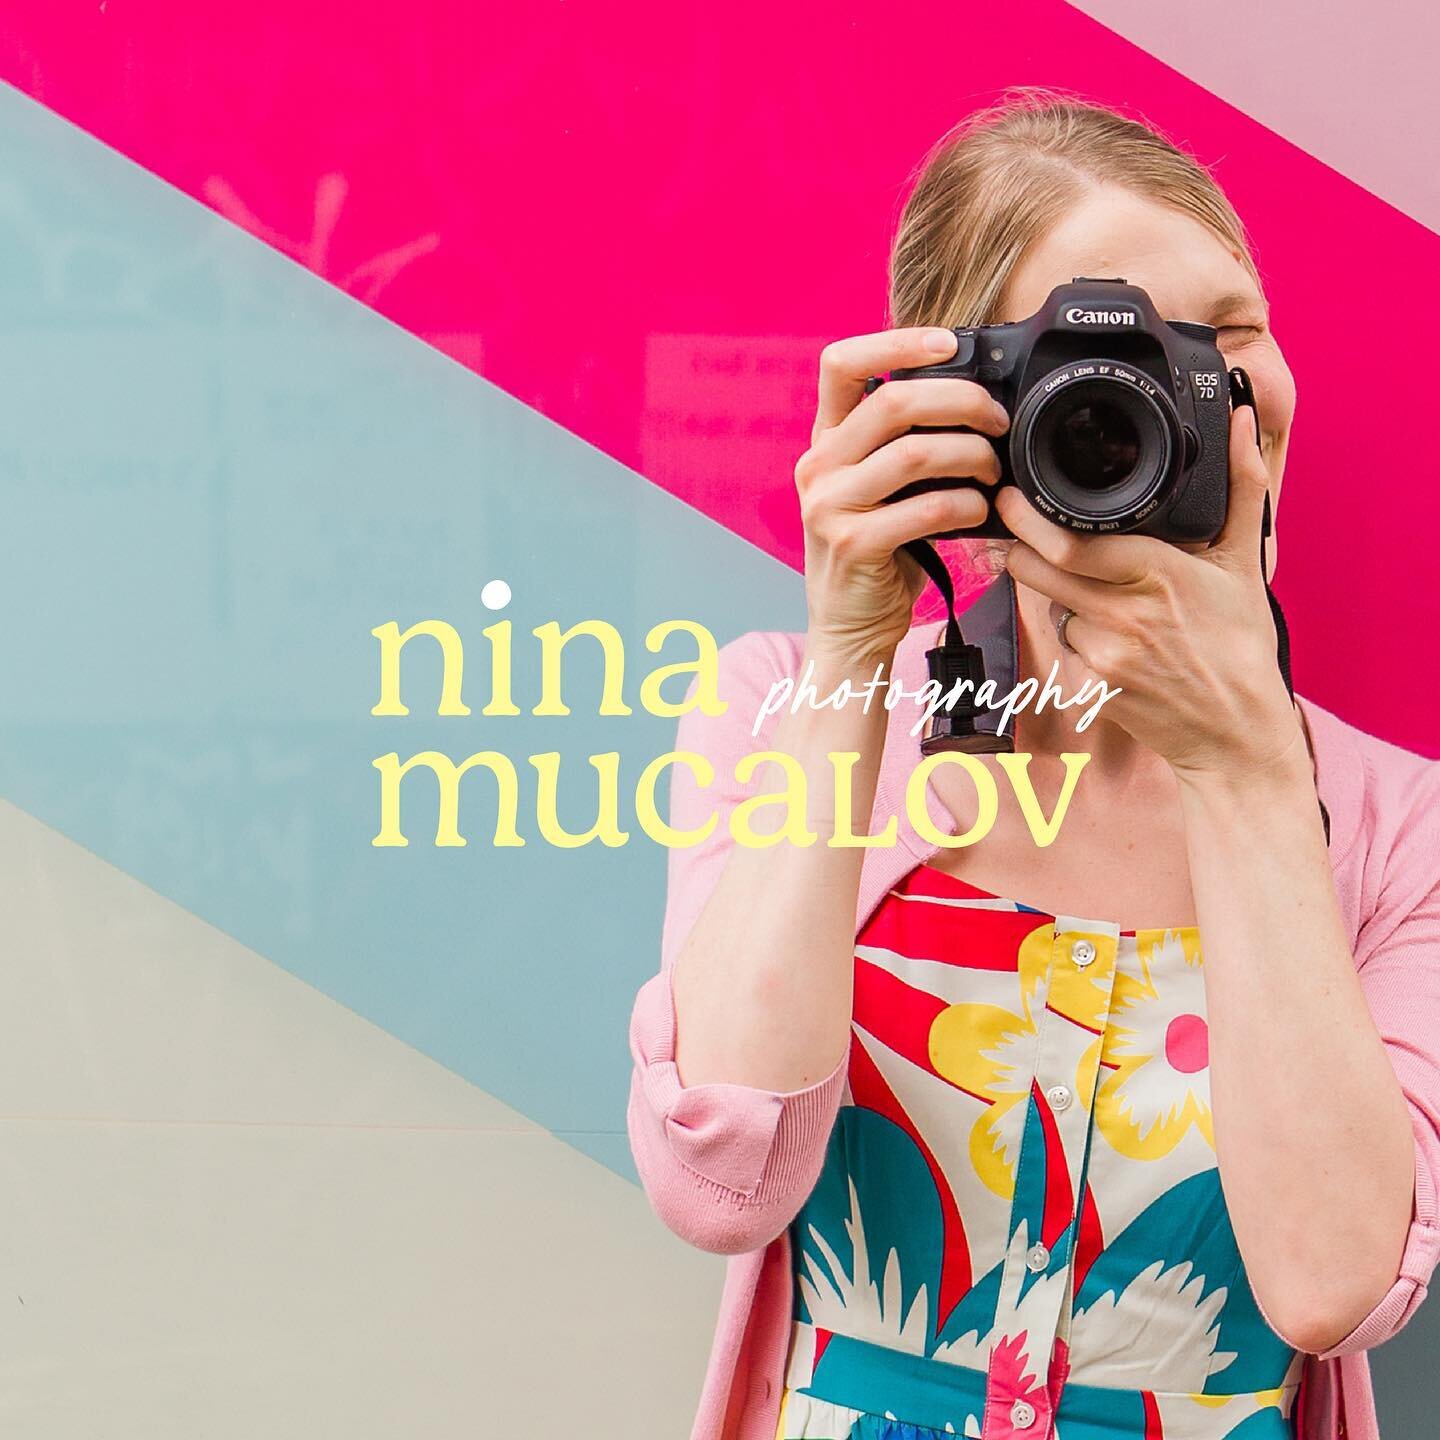 📸 Brand launch 📣 ! The insanely talented brand photographer @ninamucalov chose March and Bloom to give her brand visuals some pep in their step.

Here&rsquo;s the thing you need to know about her photography style - they are filled with personality